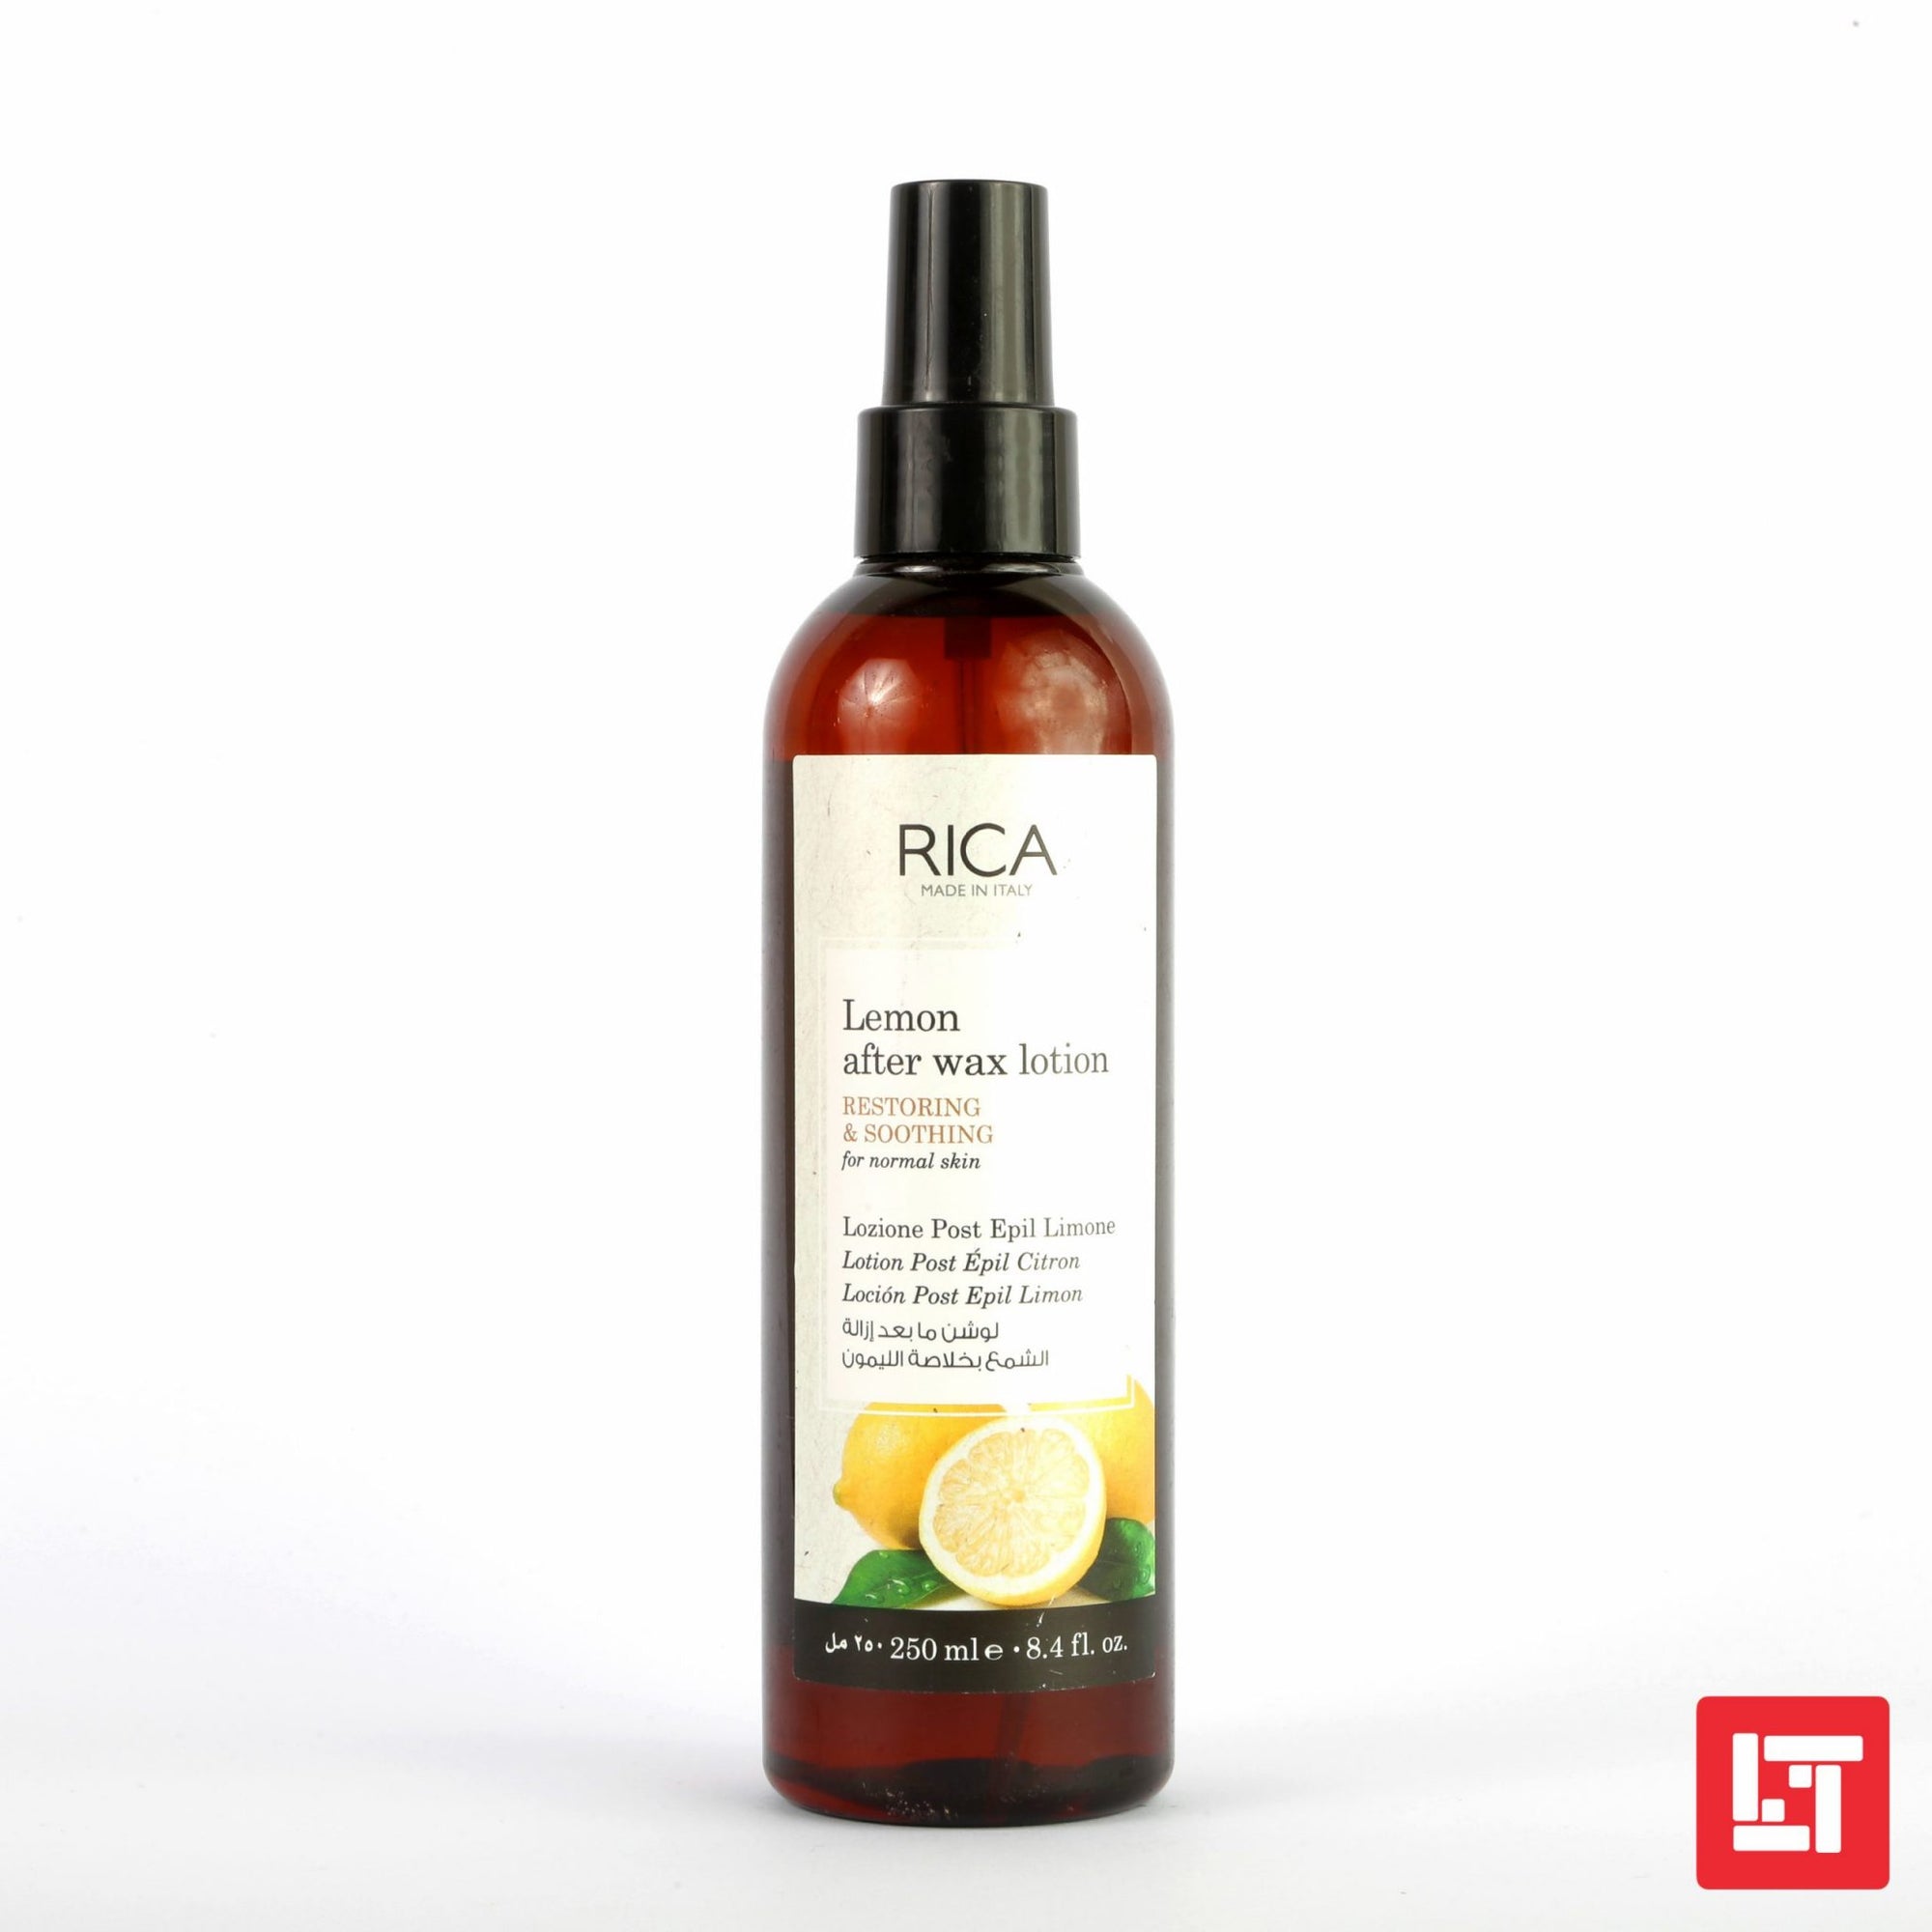 RICA Lemon after Wax Lotion Restoring & Soothing for Normal Skin 250ml freeshipping - lasertag.pk